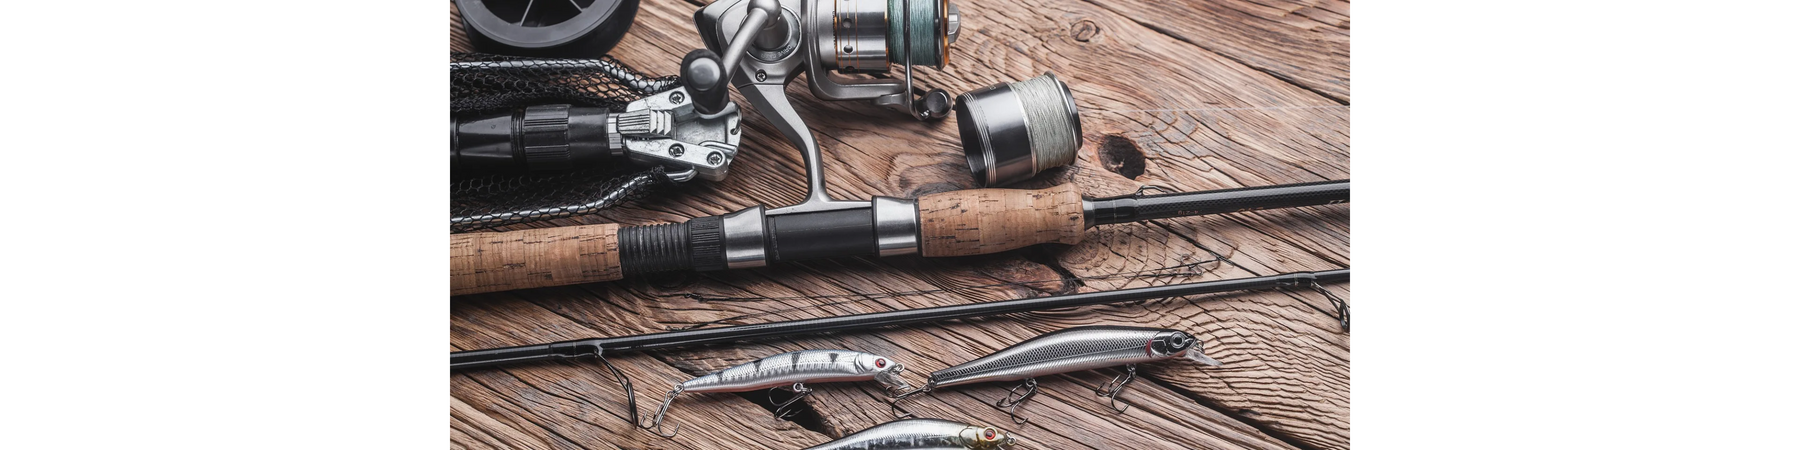 BASIC FISHING GEAR LIST FOR FIRST TIME ANGLERS